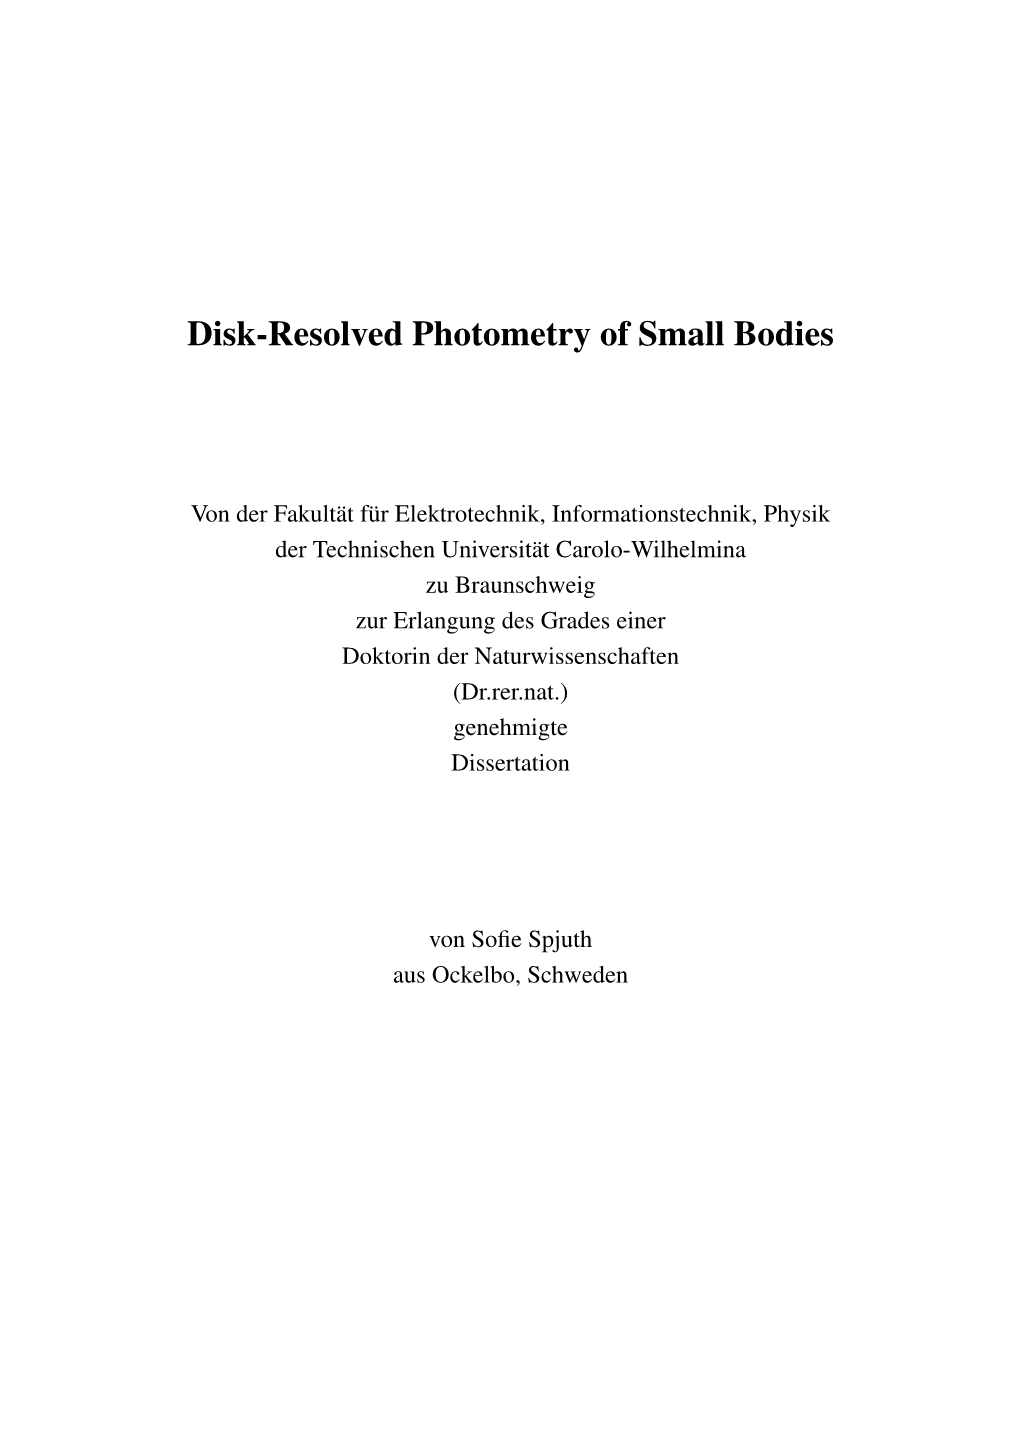 Disk-Resolved Photometry of Small Bodies